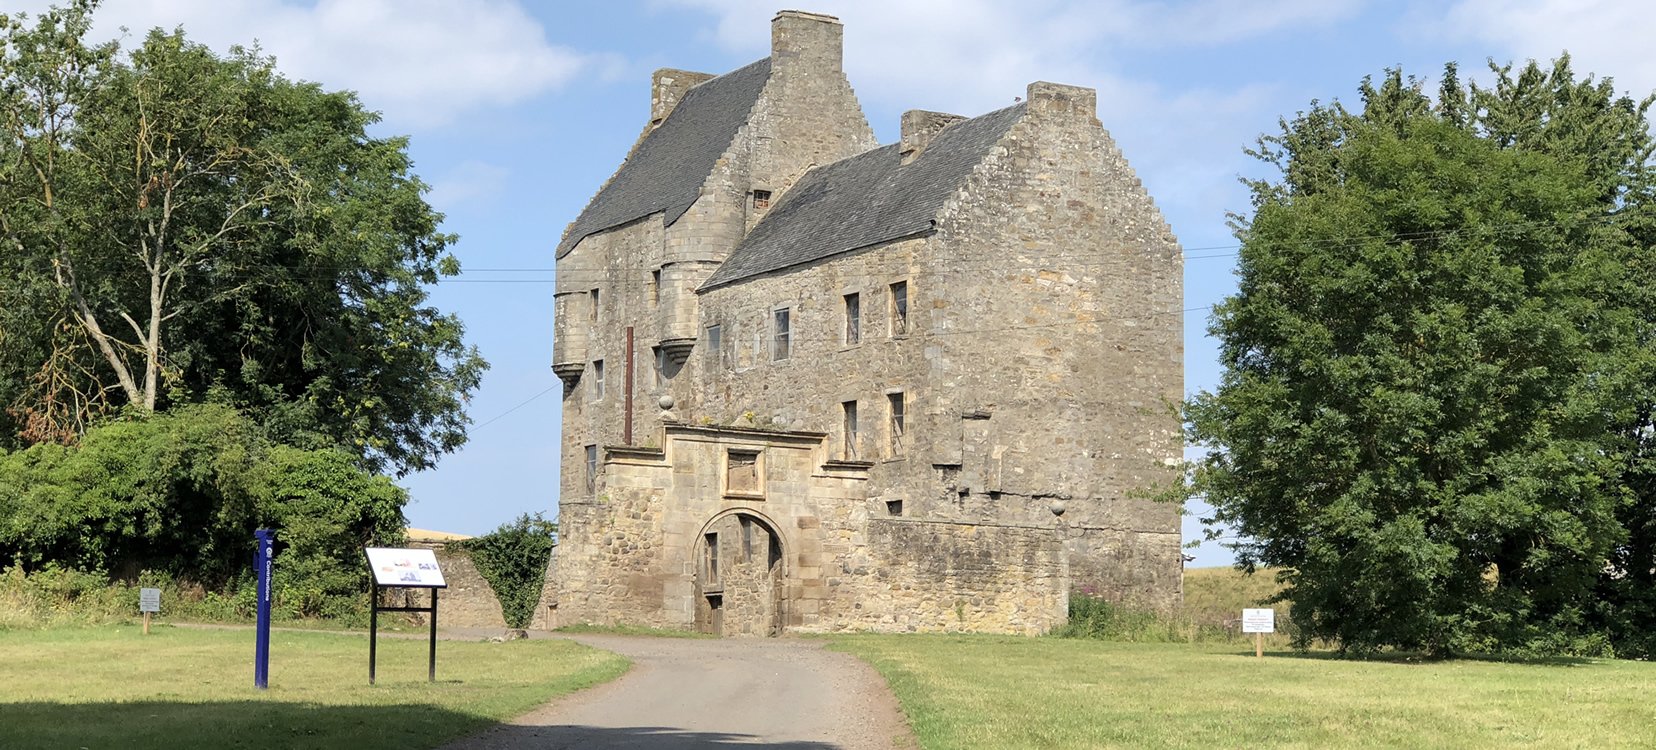 Midhope Castle near Edinburgh, used as the set for Lallybroch in The Outlander TV series